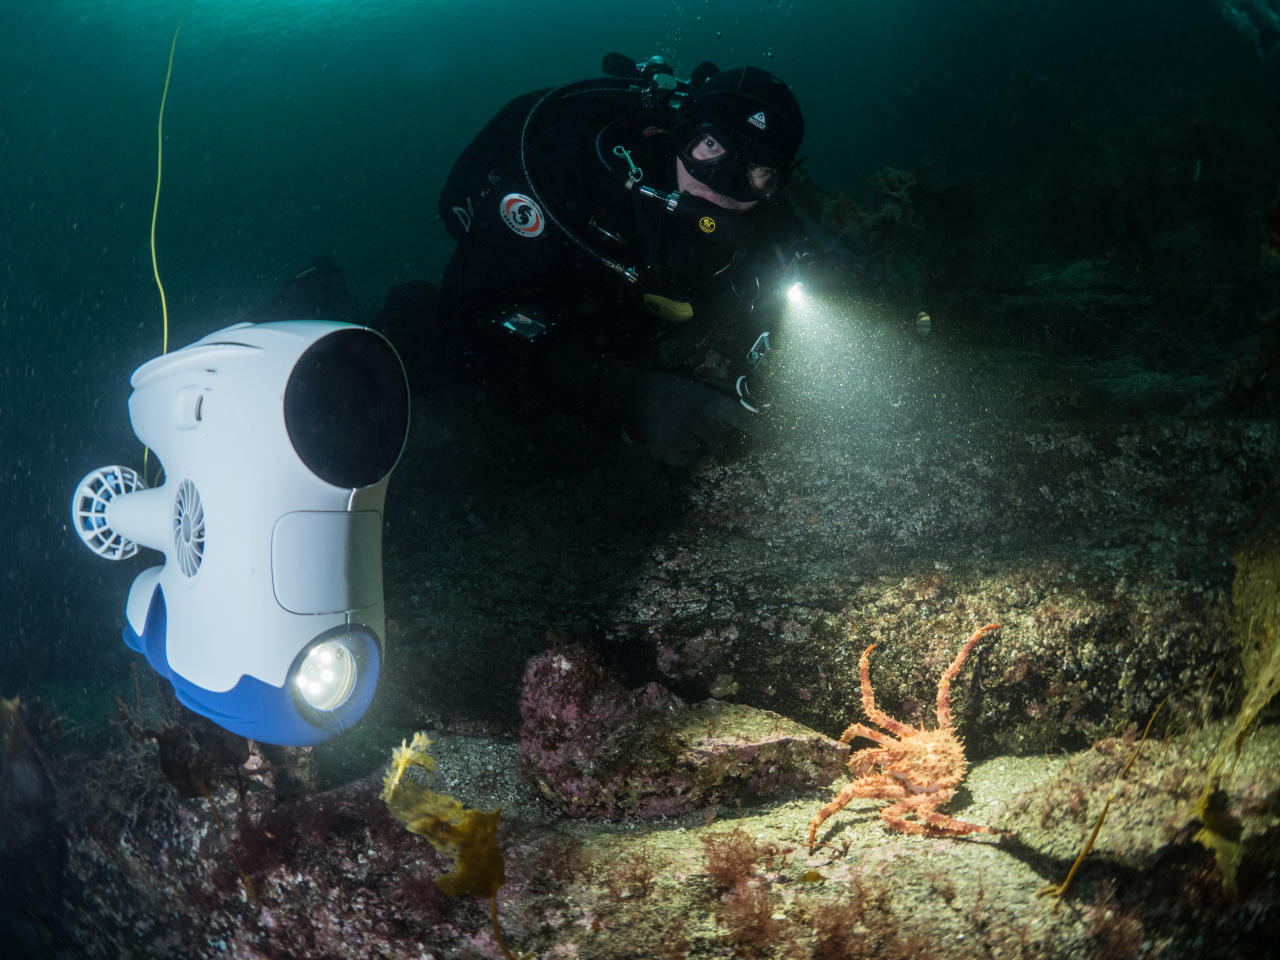 Blueye Pioneer and scuba diver looking at crab